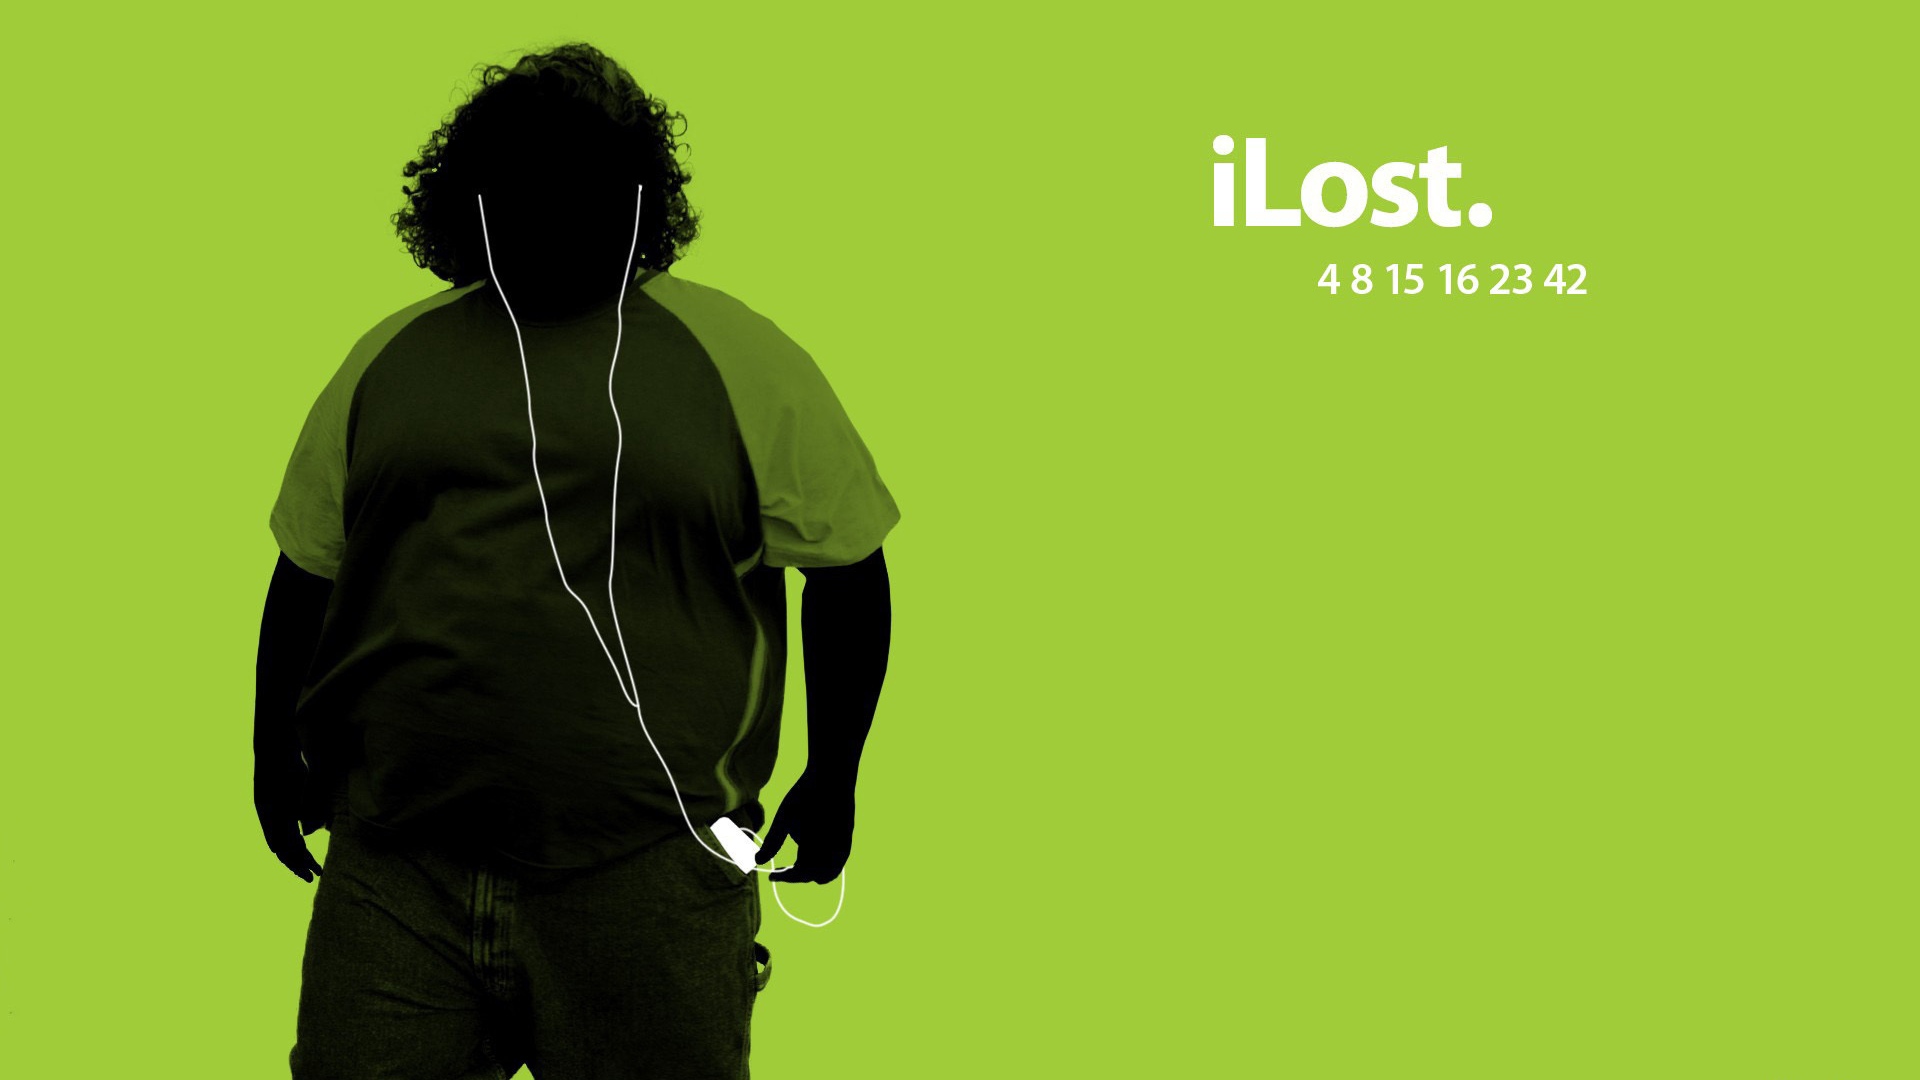 Wallpaper Green, Black, Lost, White - Lost Tv Show Iphone Background - HD Wallpaper 